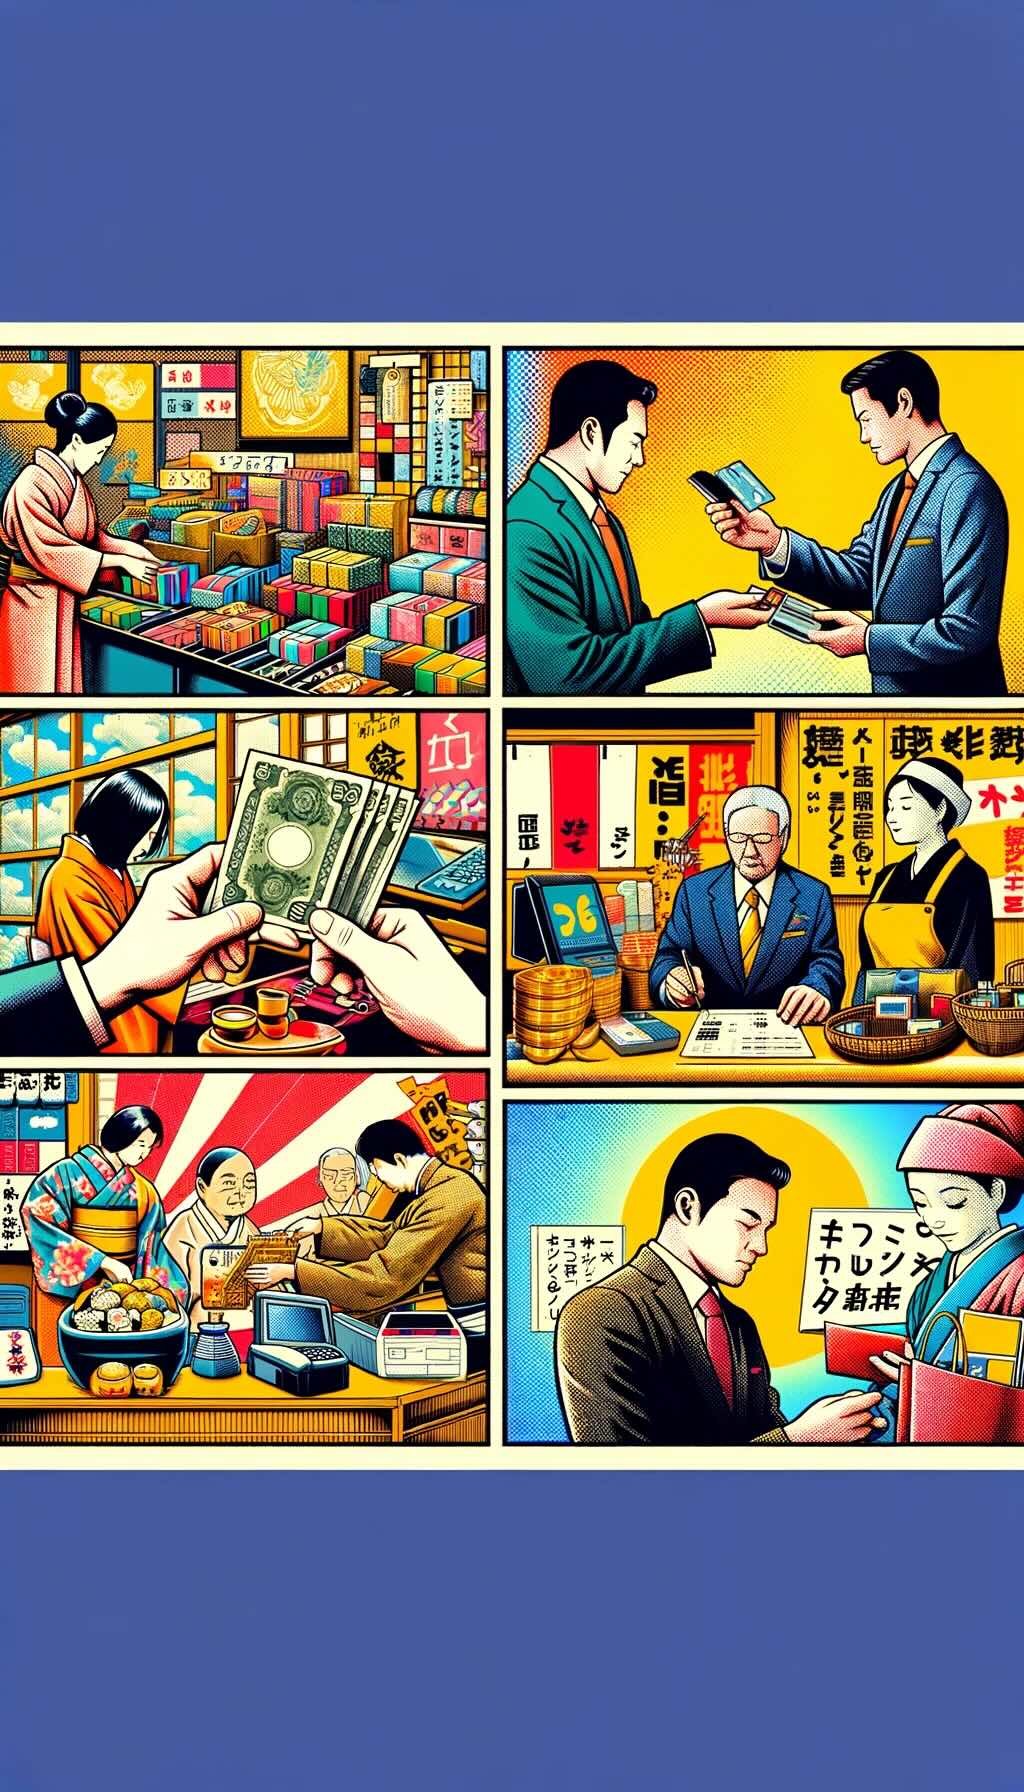 Nuances of shopping etiquette and tips in Japan vividly illustrates various aspects of the shopping experience, including handling items in stores, payment preferences, gift-wrapping, omiyage culture, and the tax-free shopping process for tourists